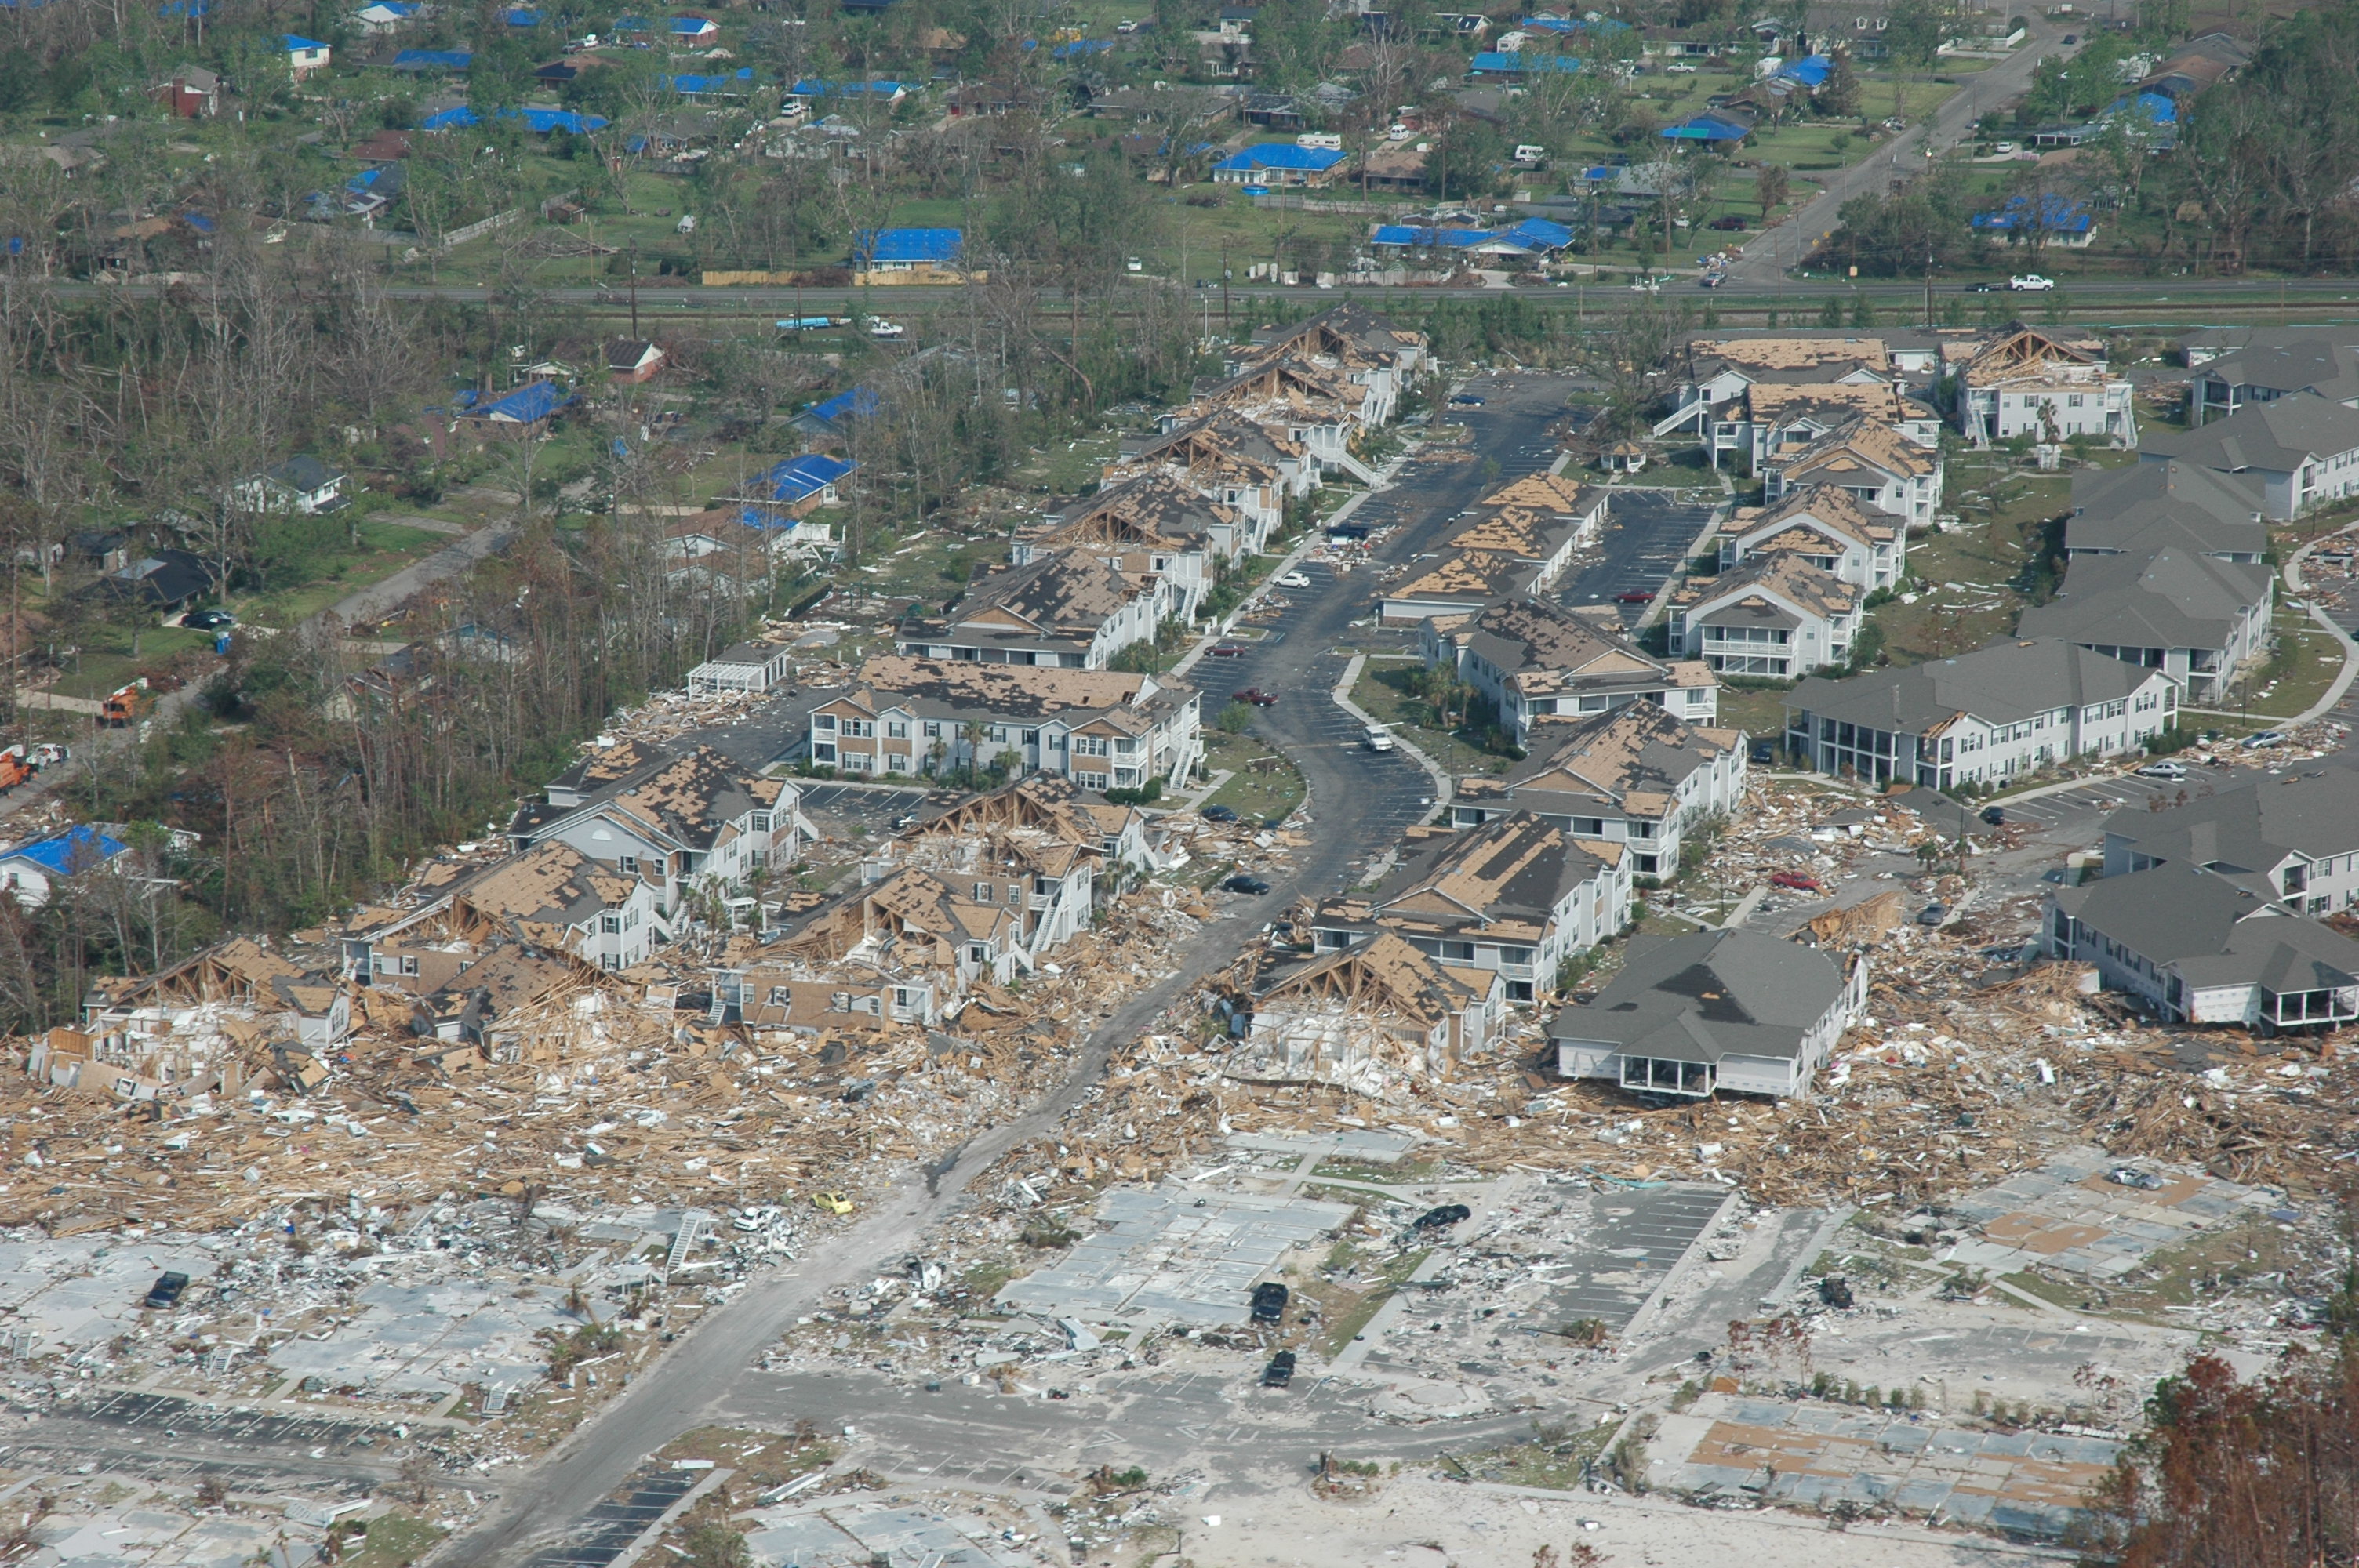 FEMA - 16852 - Photograph by Marty Bahamonde taken on 09-30-2005 in Mississippi